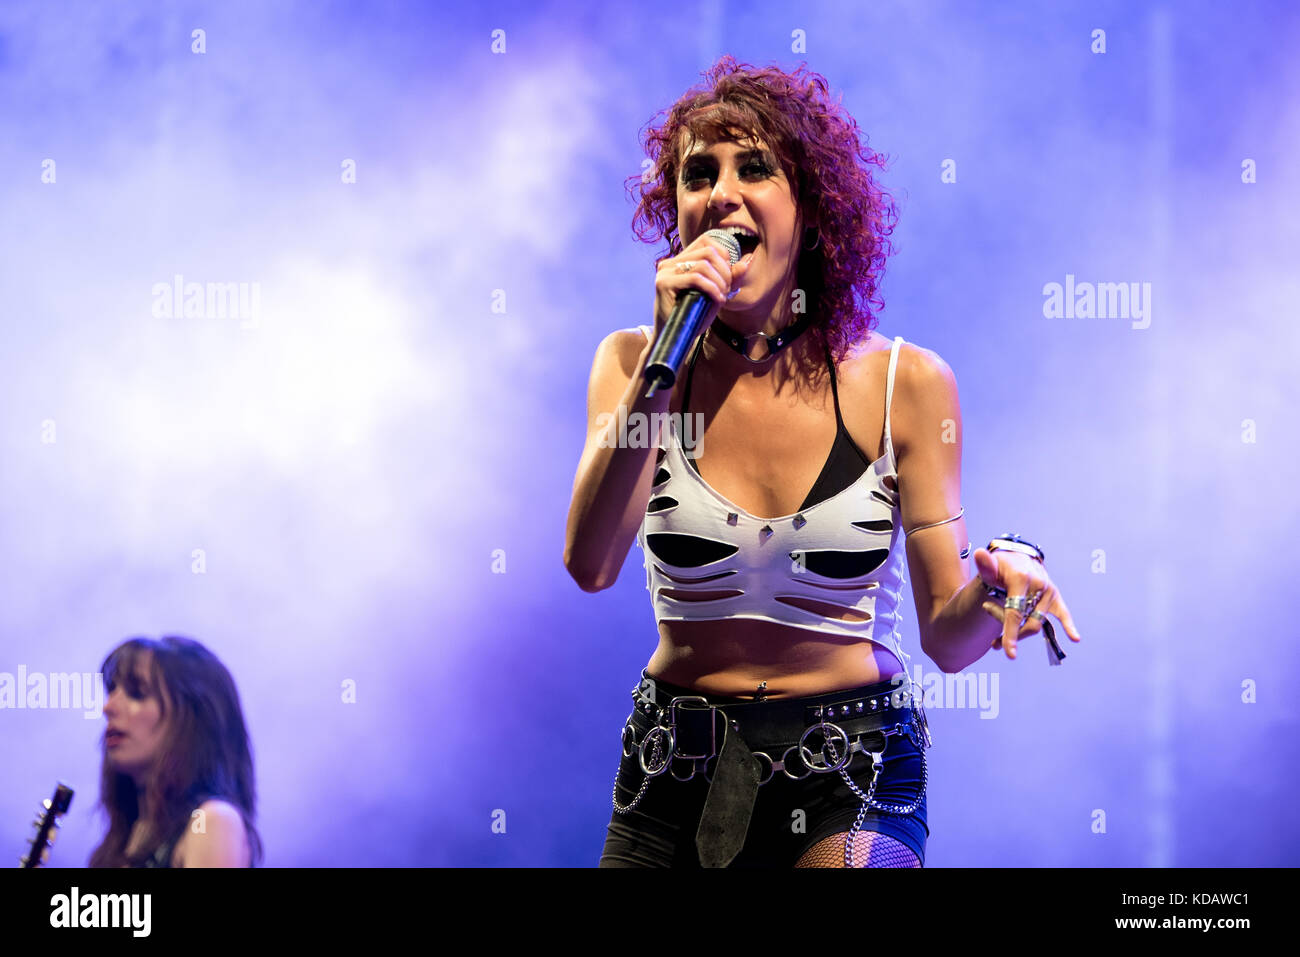 MADRID - JUN 22: Lizzies (female hard rock music band) perform in concert at Download (heavy metal music festival) on June 22, 2017 in Madrid, Spain. Stock Photo